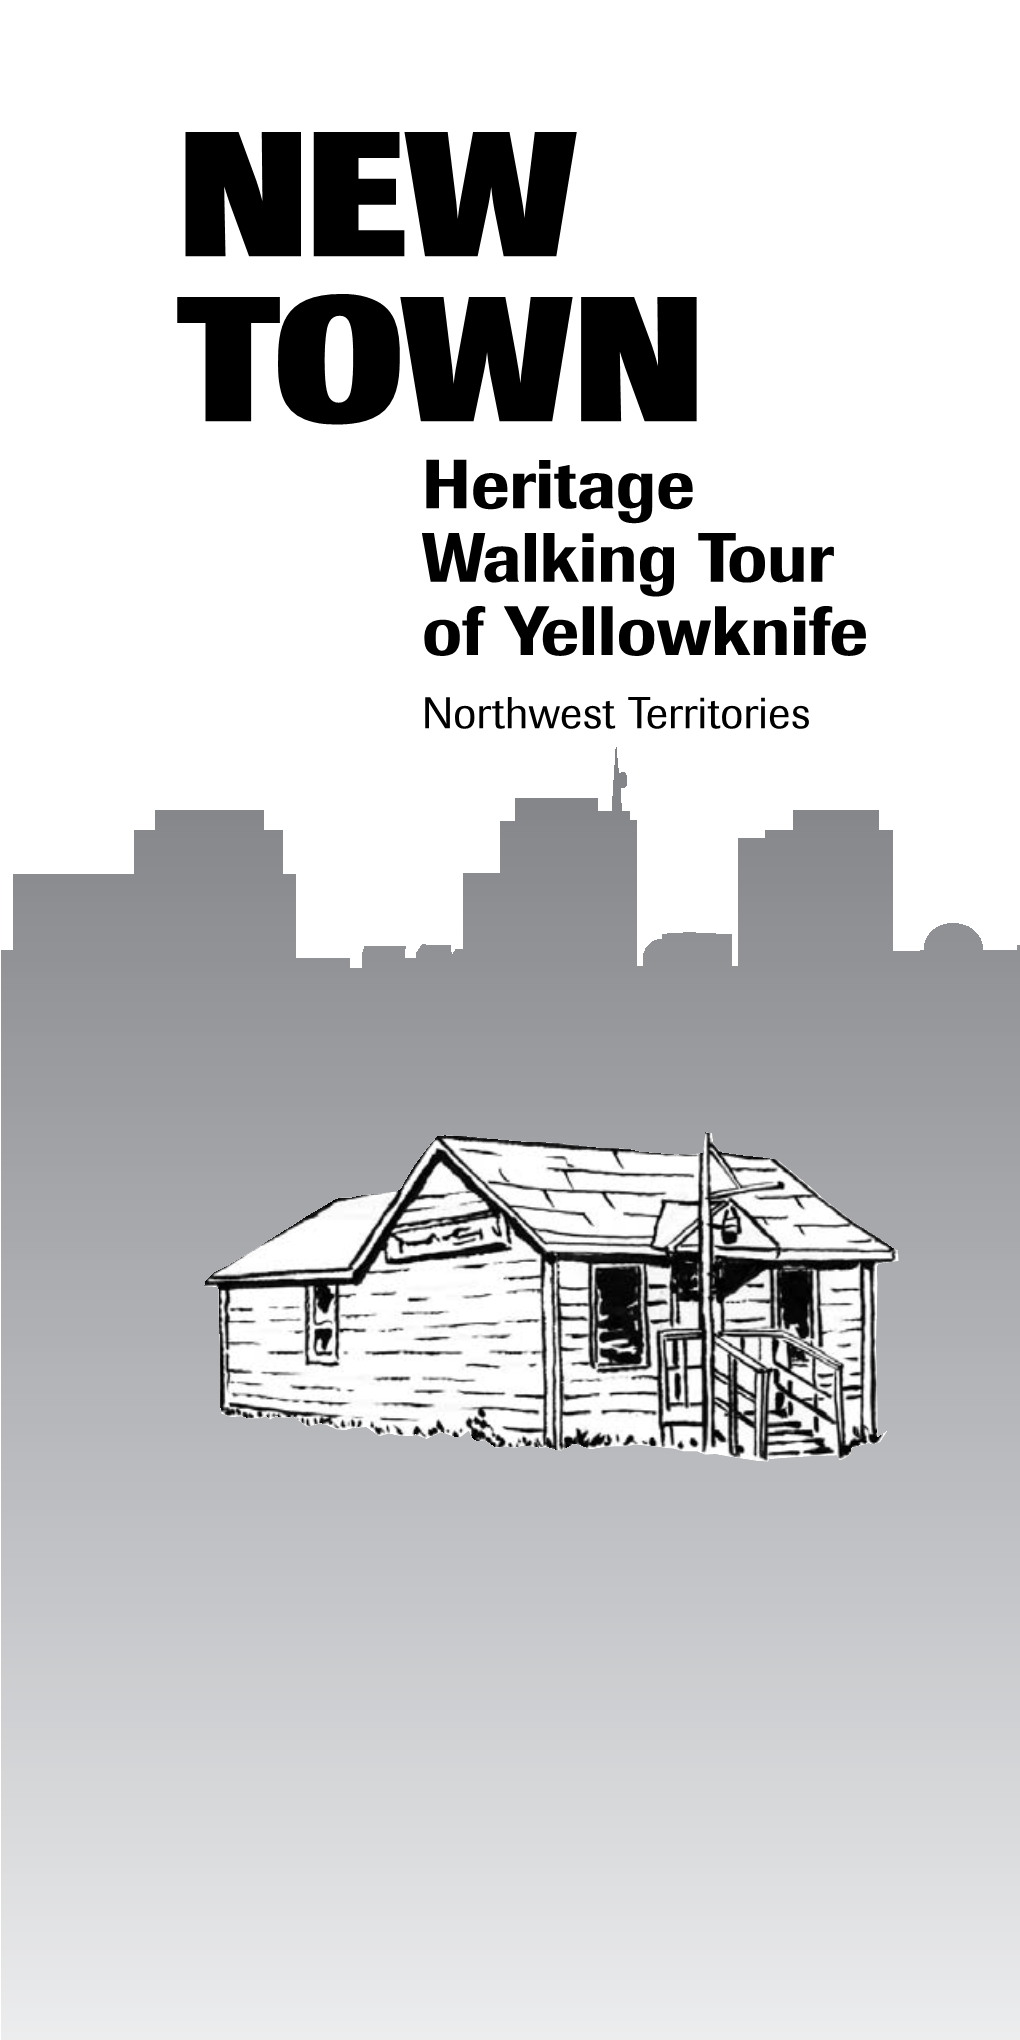 NEW TOWN Heritage Walking Tour of Yellowknife Northwest Territories 103088 Walking Tour Booklet 5/9/06 7:57 AM Page 1